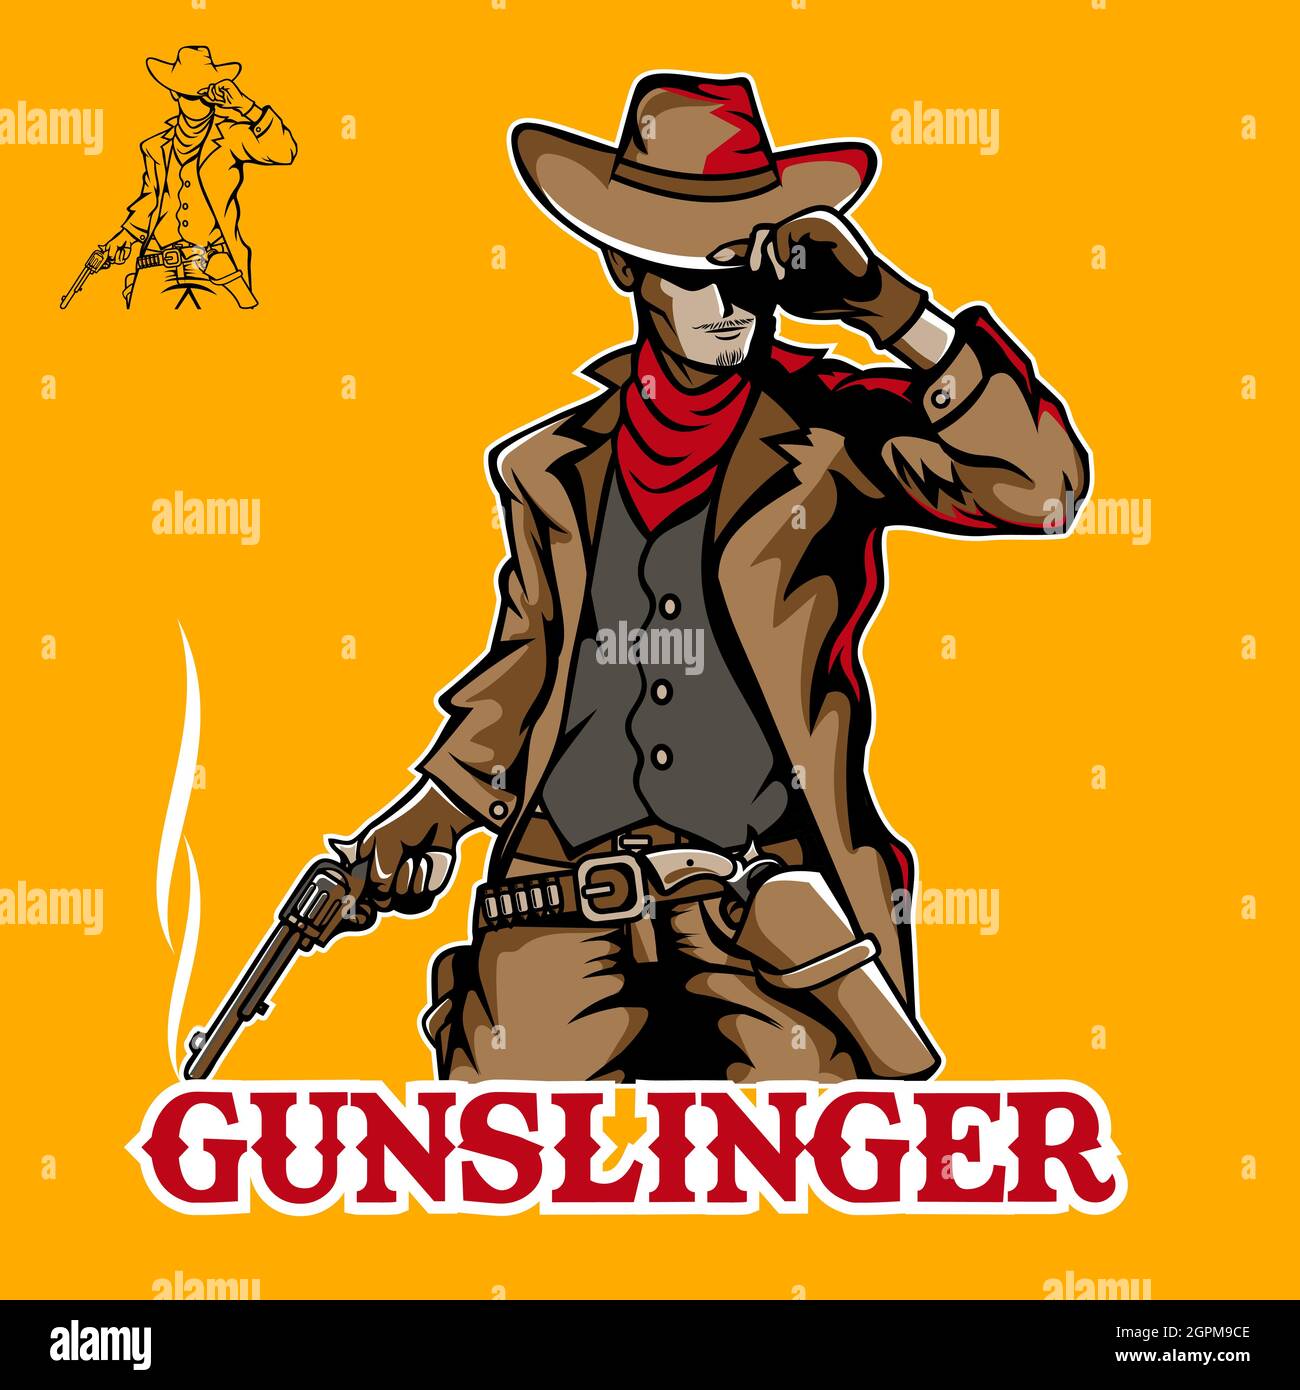 Gunslinger vector illustration in cool pose for esport, tshirt, or any other purpose Stock Vector